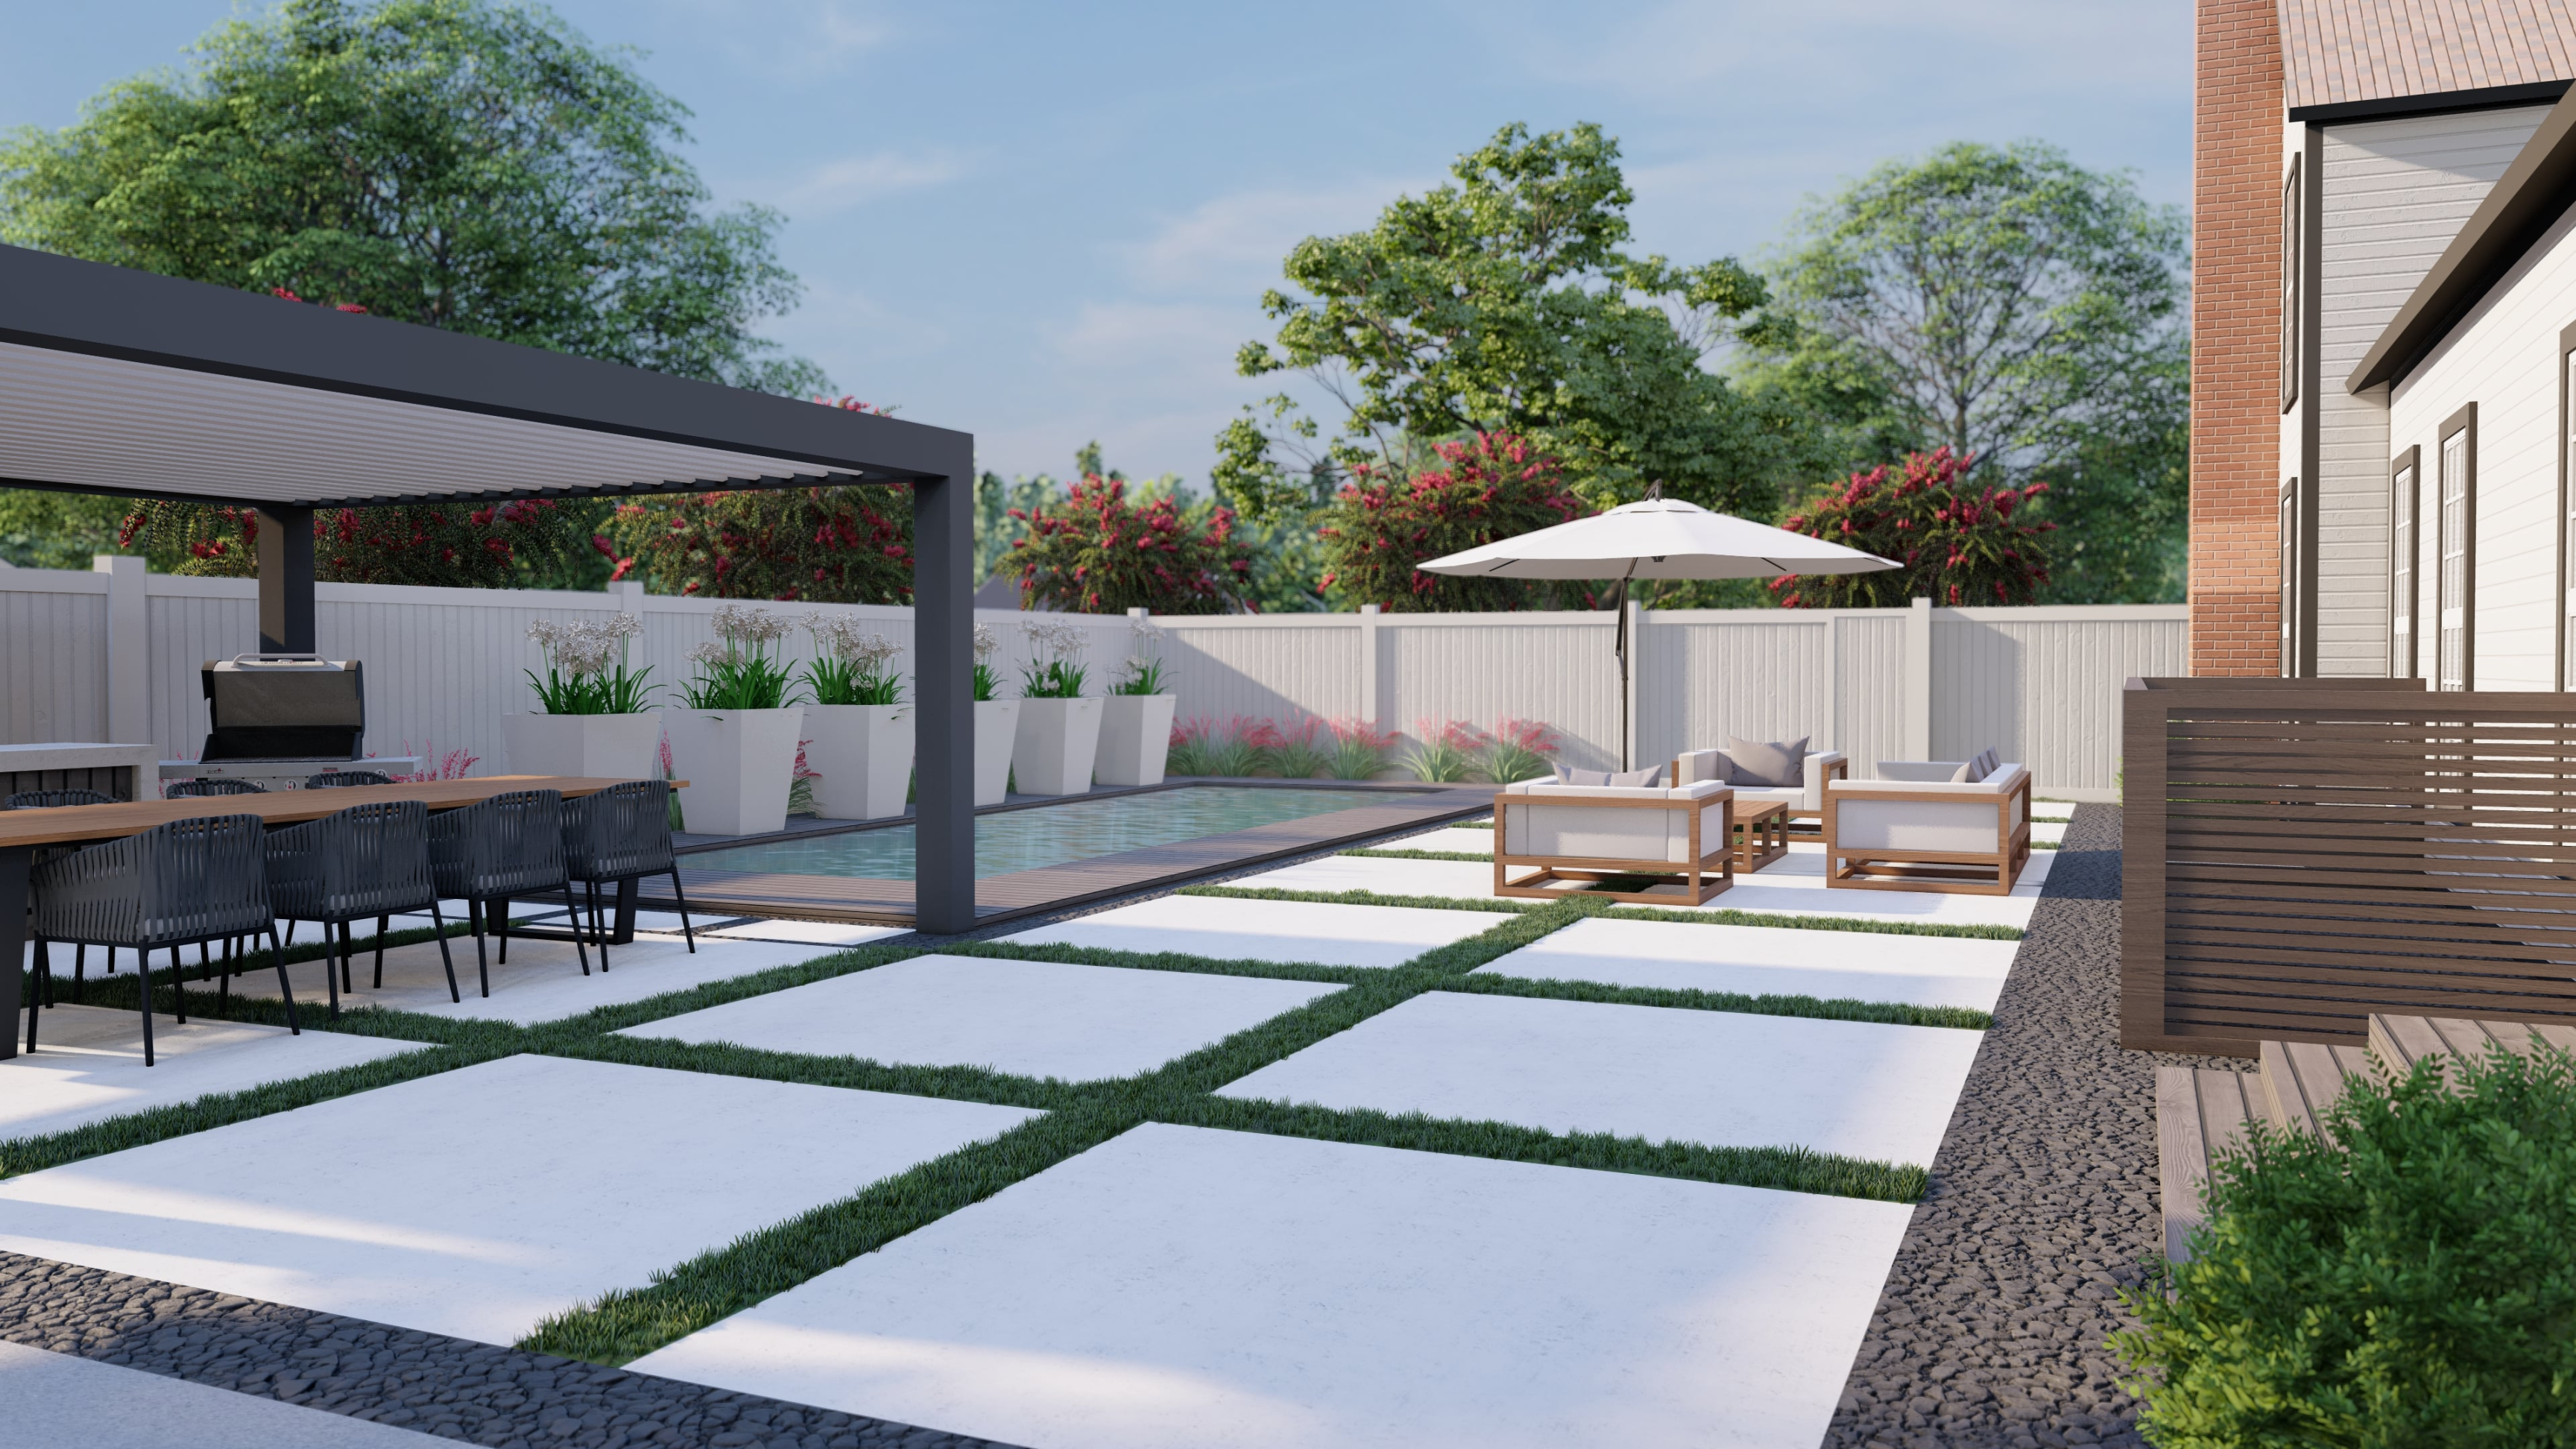 Backyard Landscaping Ideas to Improve Your Outdoor Space